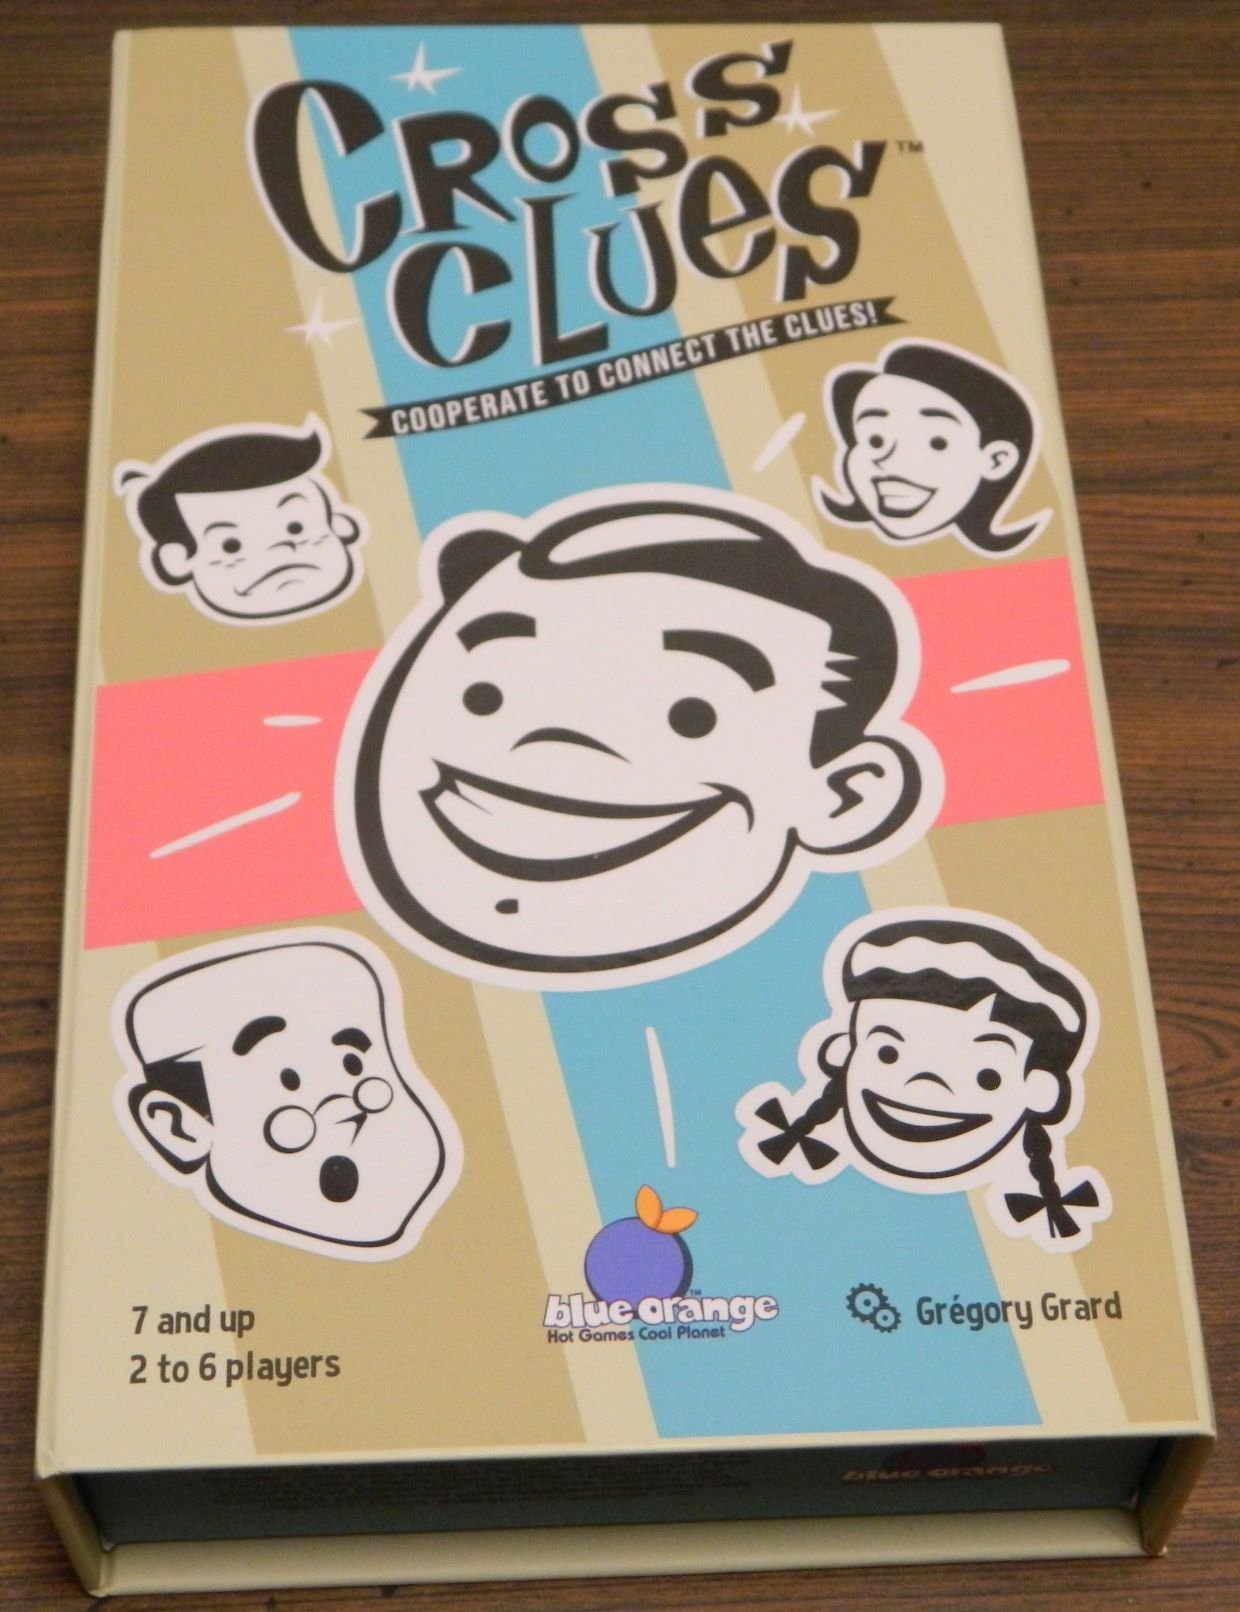 Cross Clues Board Game Review and Rules